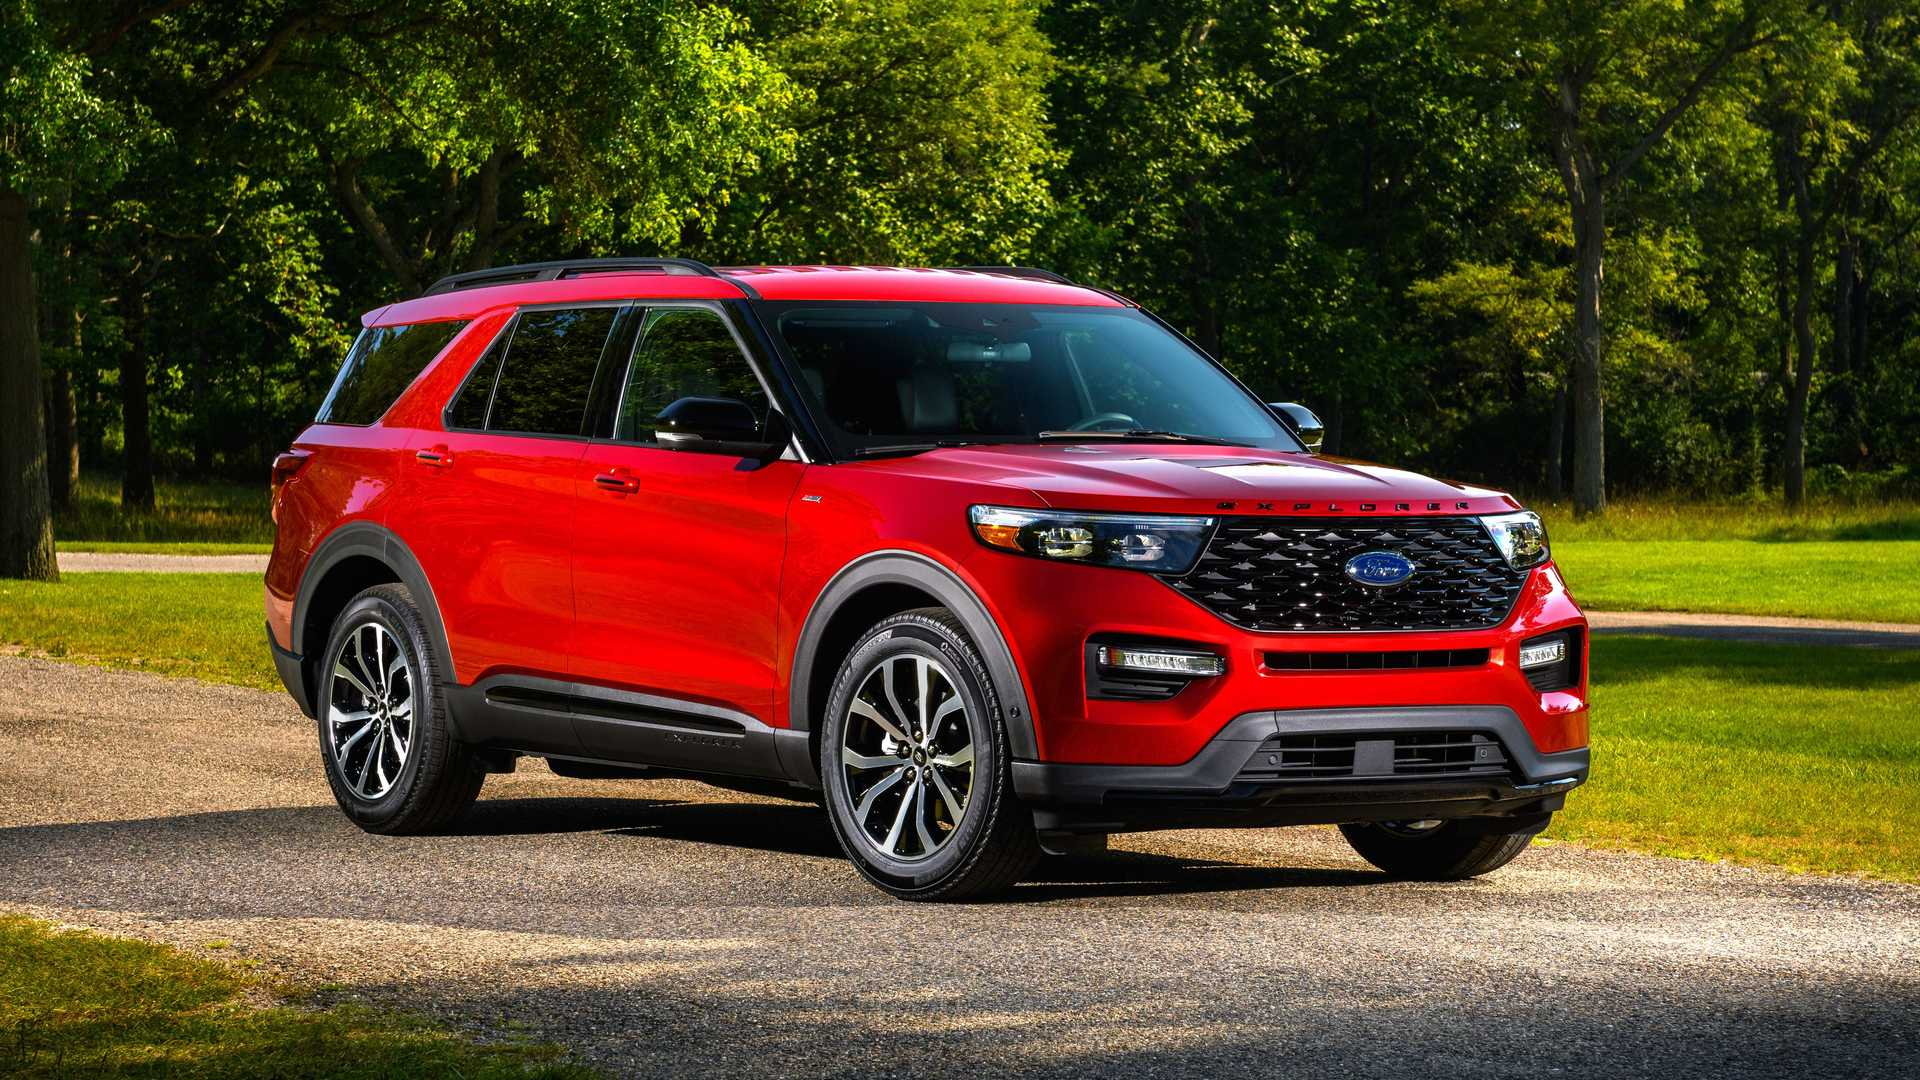 2022 Ford Explorer ST Revealed With Rear Wheel Drive New ST Line Car